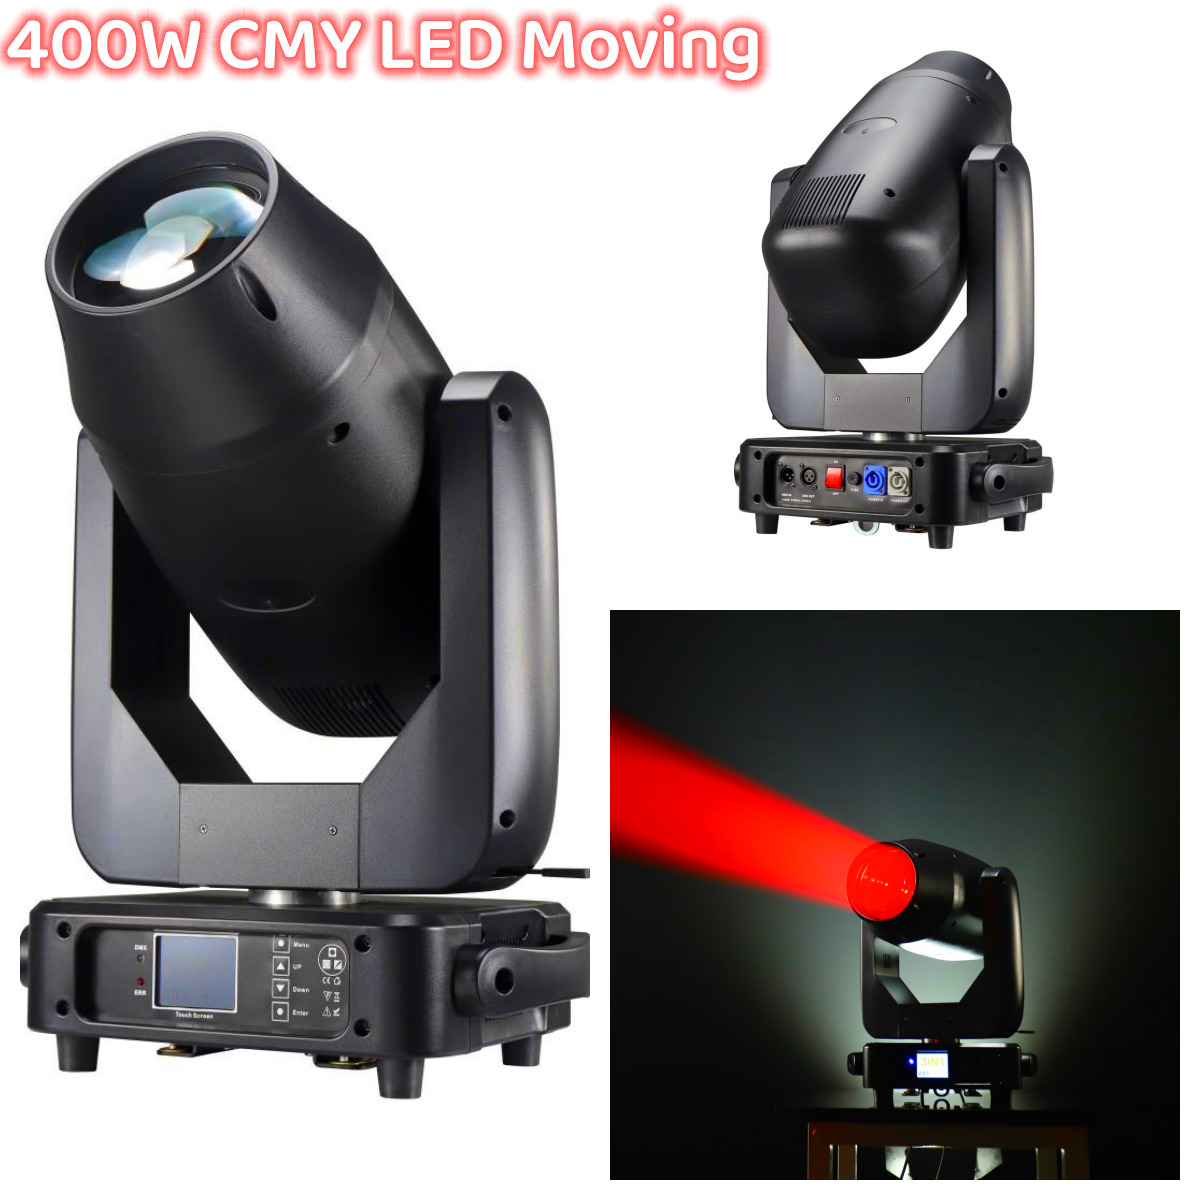 US 400W 3in1 CMY Led Moving Head Light Beam Spot Wash CTO Stage DJ Lighting